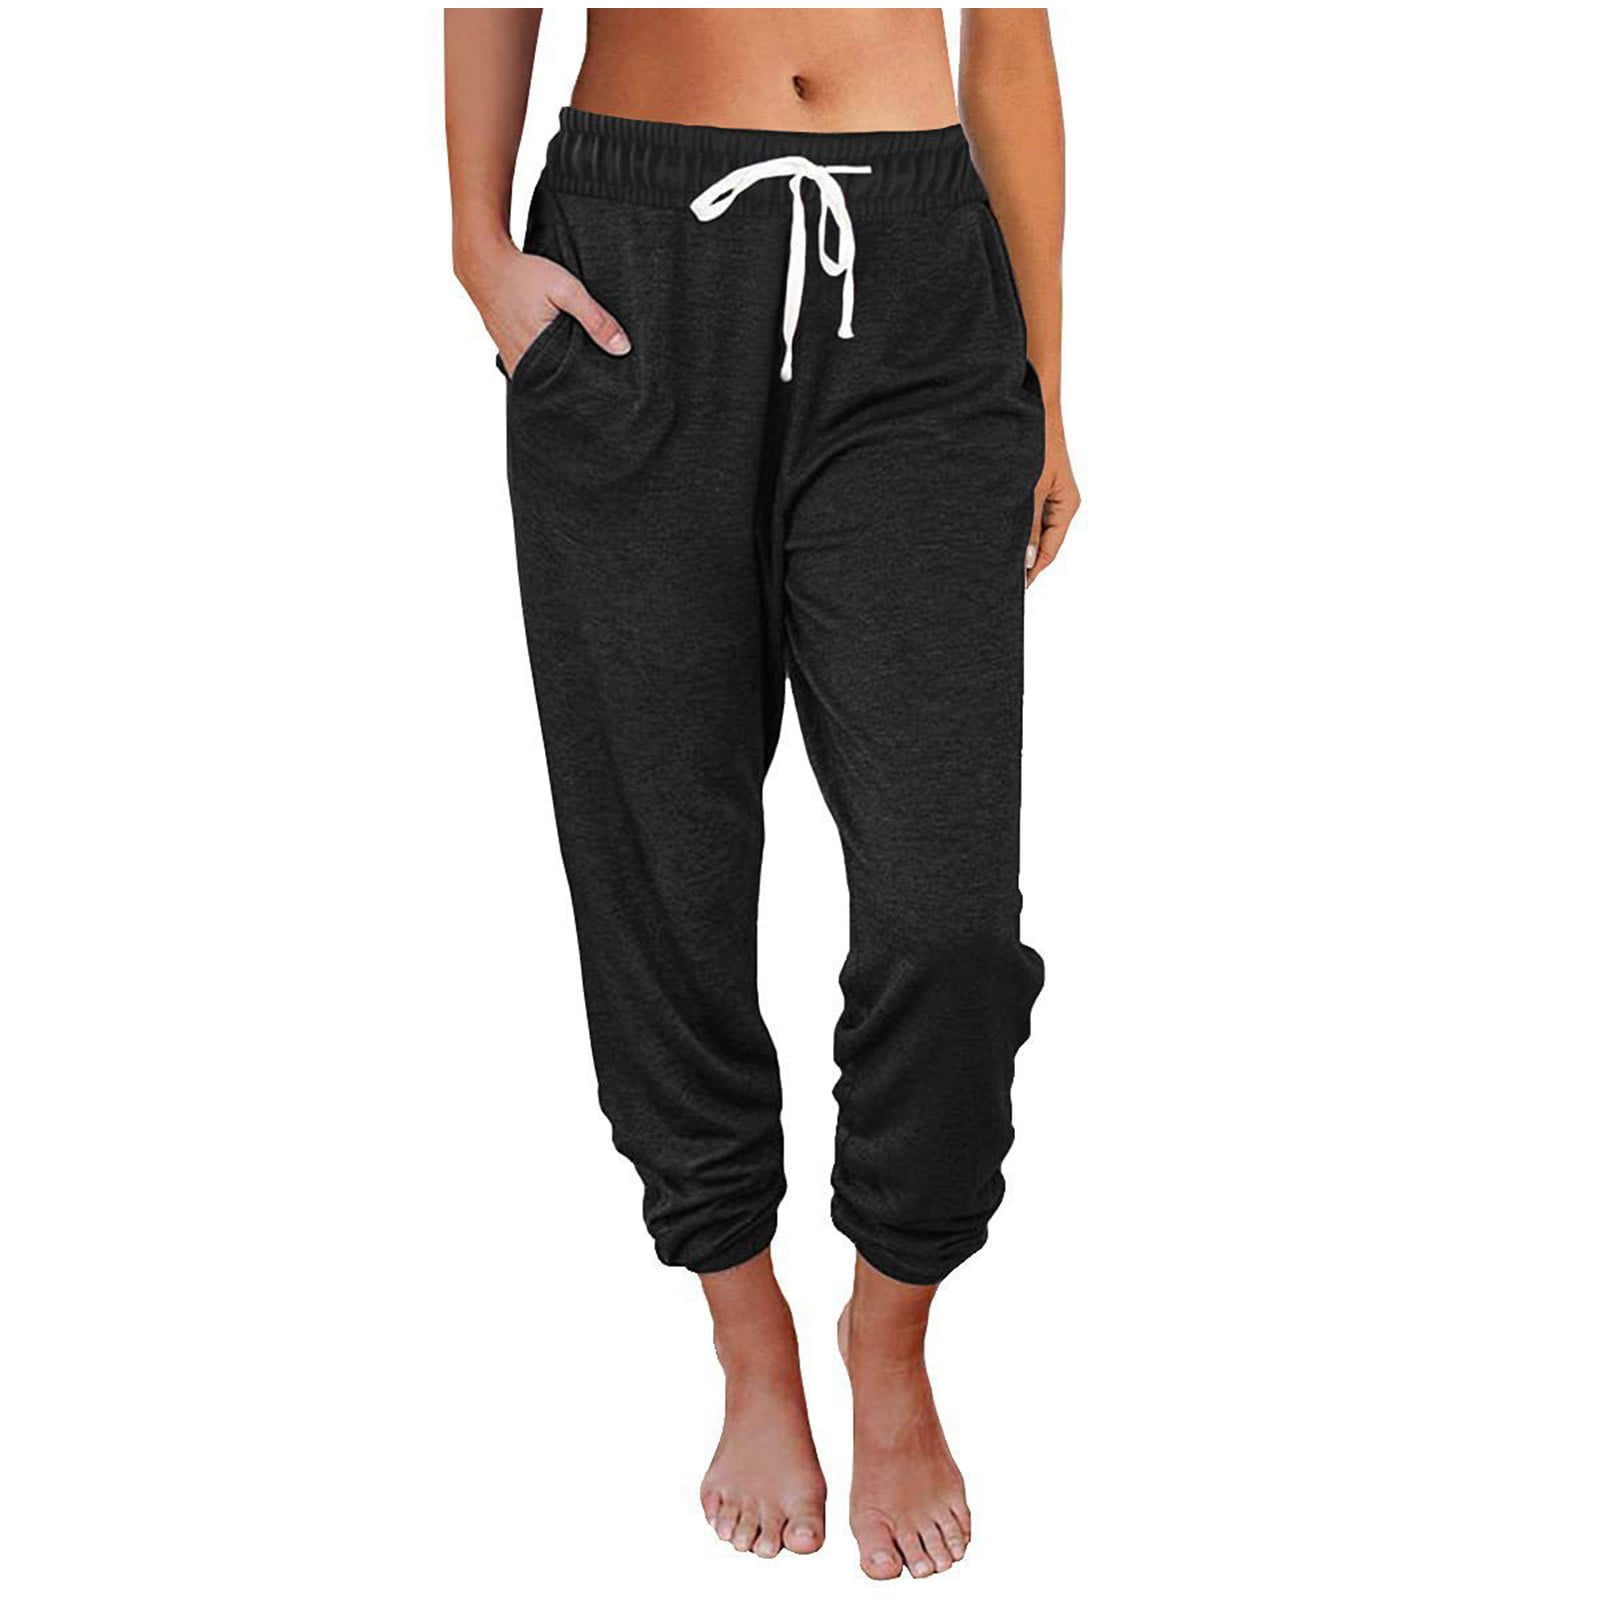 Aoochasliy Womens Pants Plus Size Clearance Solid Color Sweatpants ...